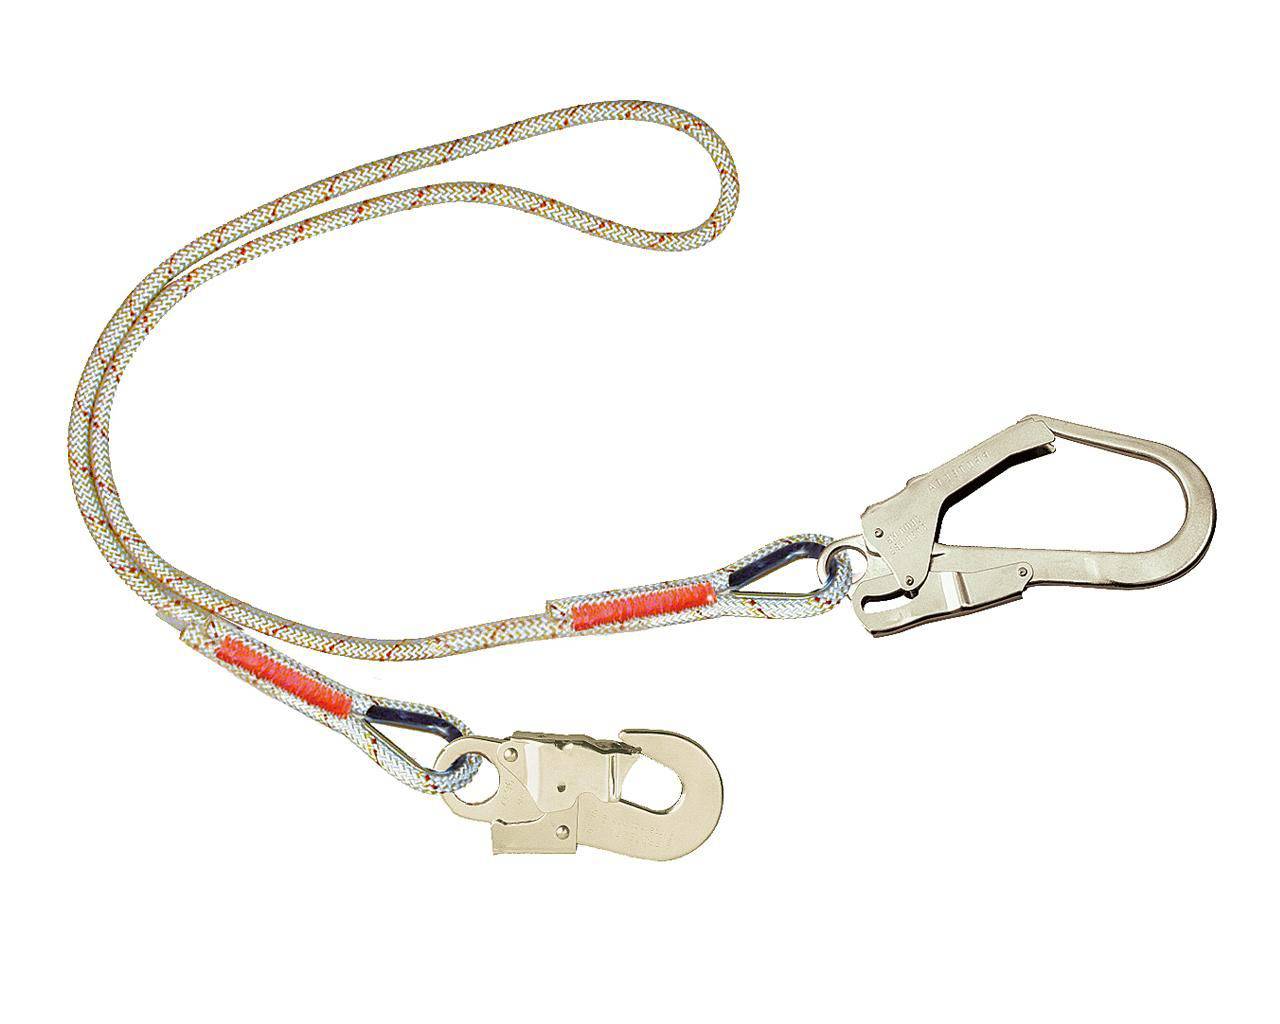 3M Protecta 1.5m Single Leg Rope Work Positioning Lanyard with Scaffold Hook AL415C2 - SecureHeights